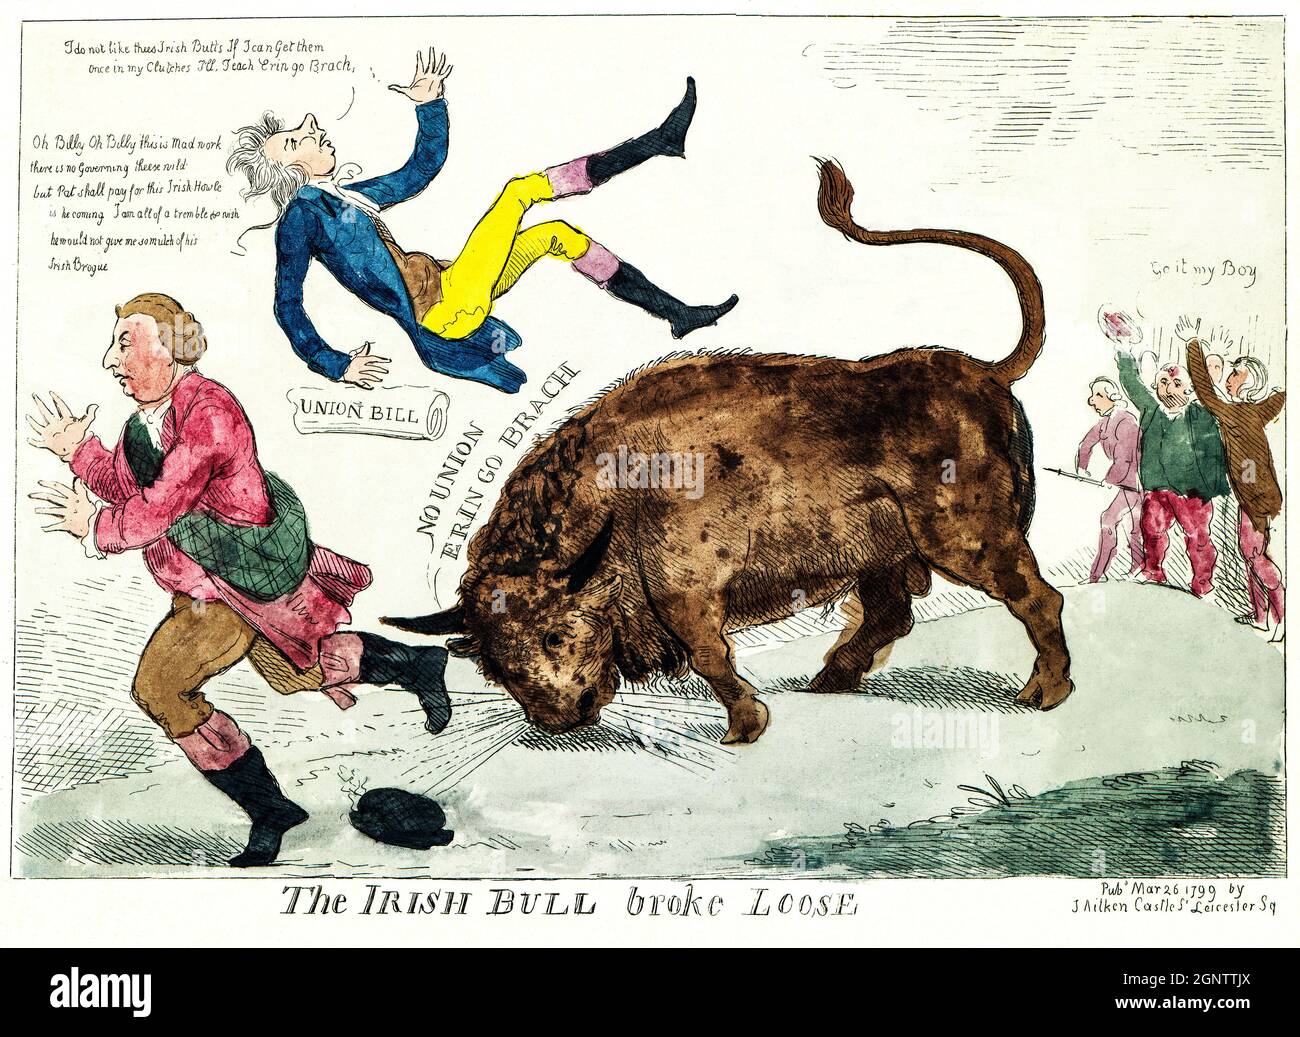 A 19th century cartoon about Irish Union showing the 'Irish Bull' tossing William Pitt into the air and about to do the same to Lord Dundas who runs to the left; on the far right, those opposed to Pitt's 'Union Bill' cheer on the bull, 'Go it my Boy.' Stock Photo